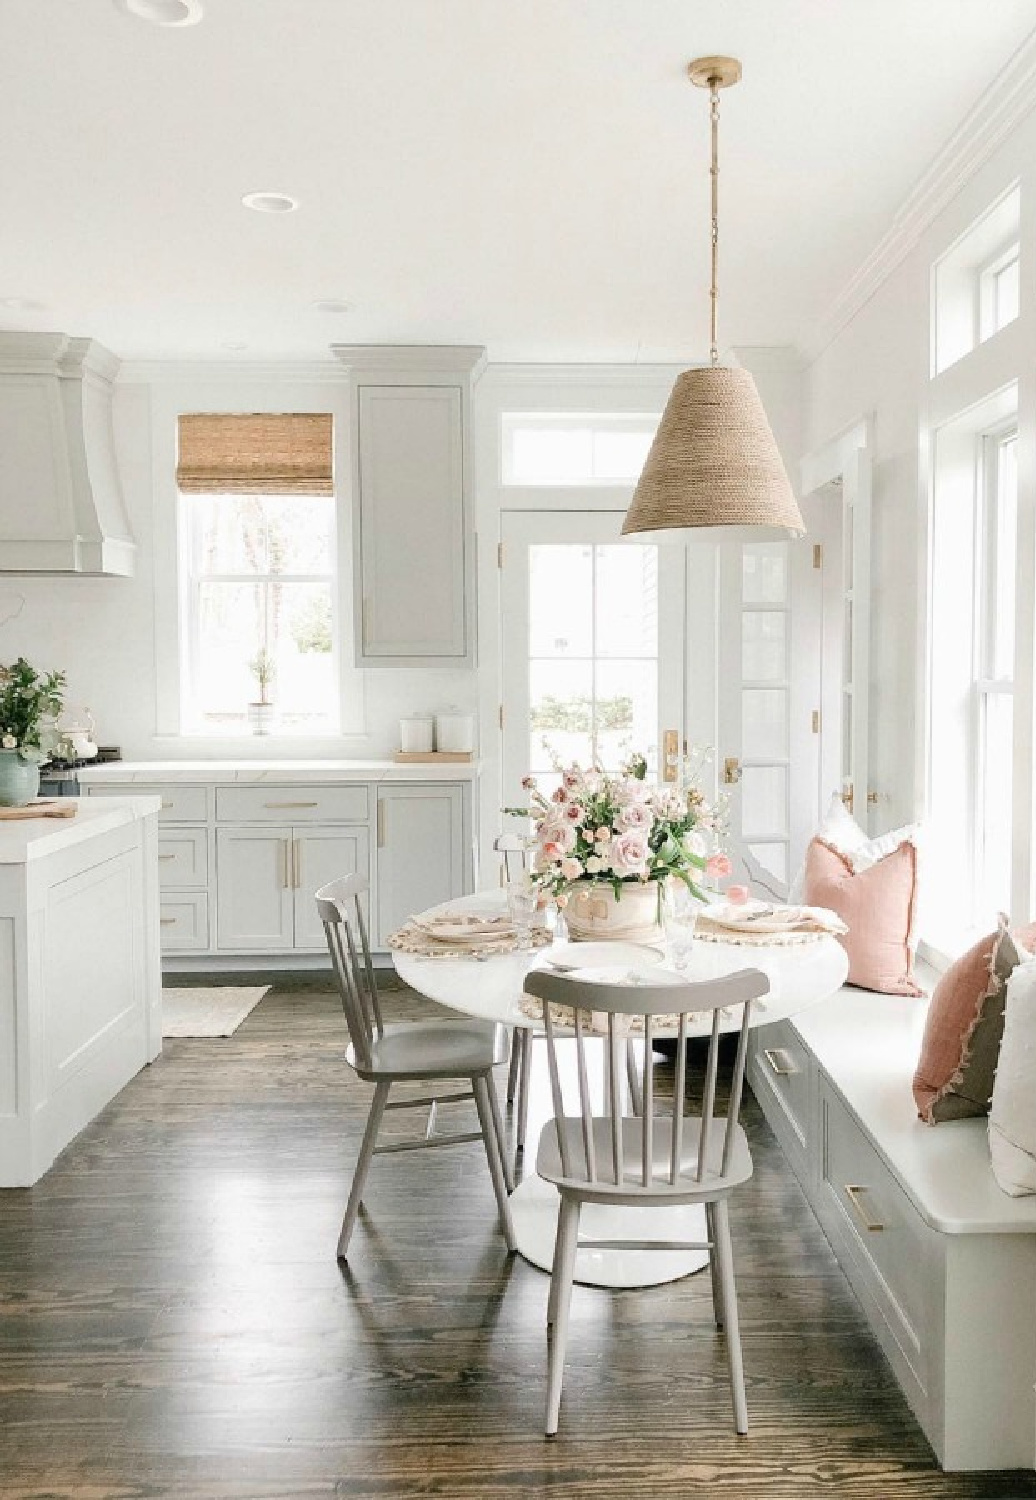 Grey and white serene kitchen with breakfast nook and window seat - Finding Lovely. #greykitchen #modernfarmhouse #kitchendesign